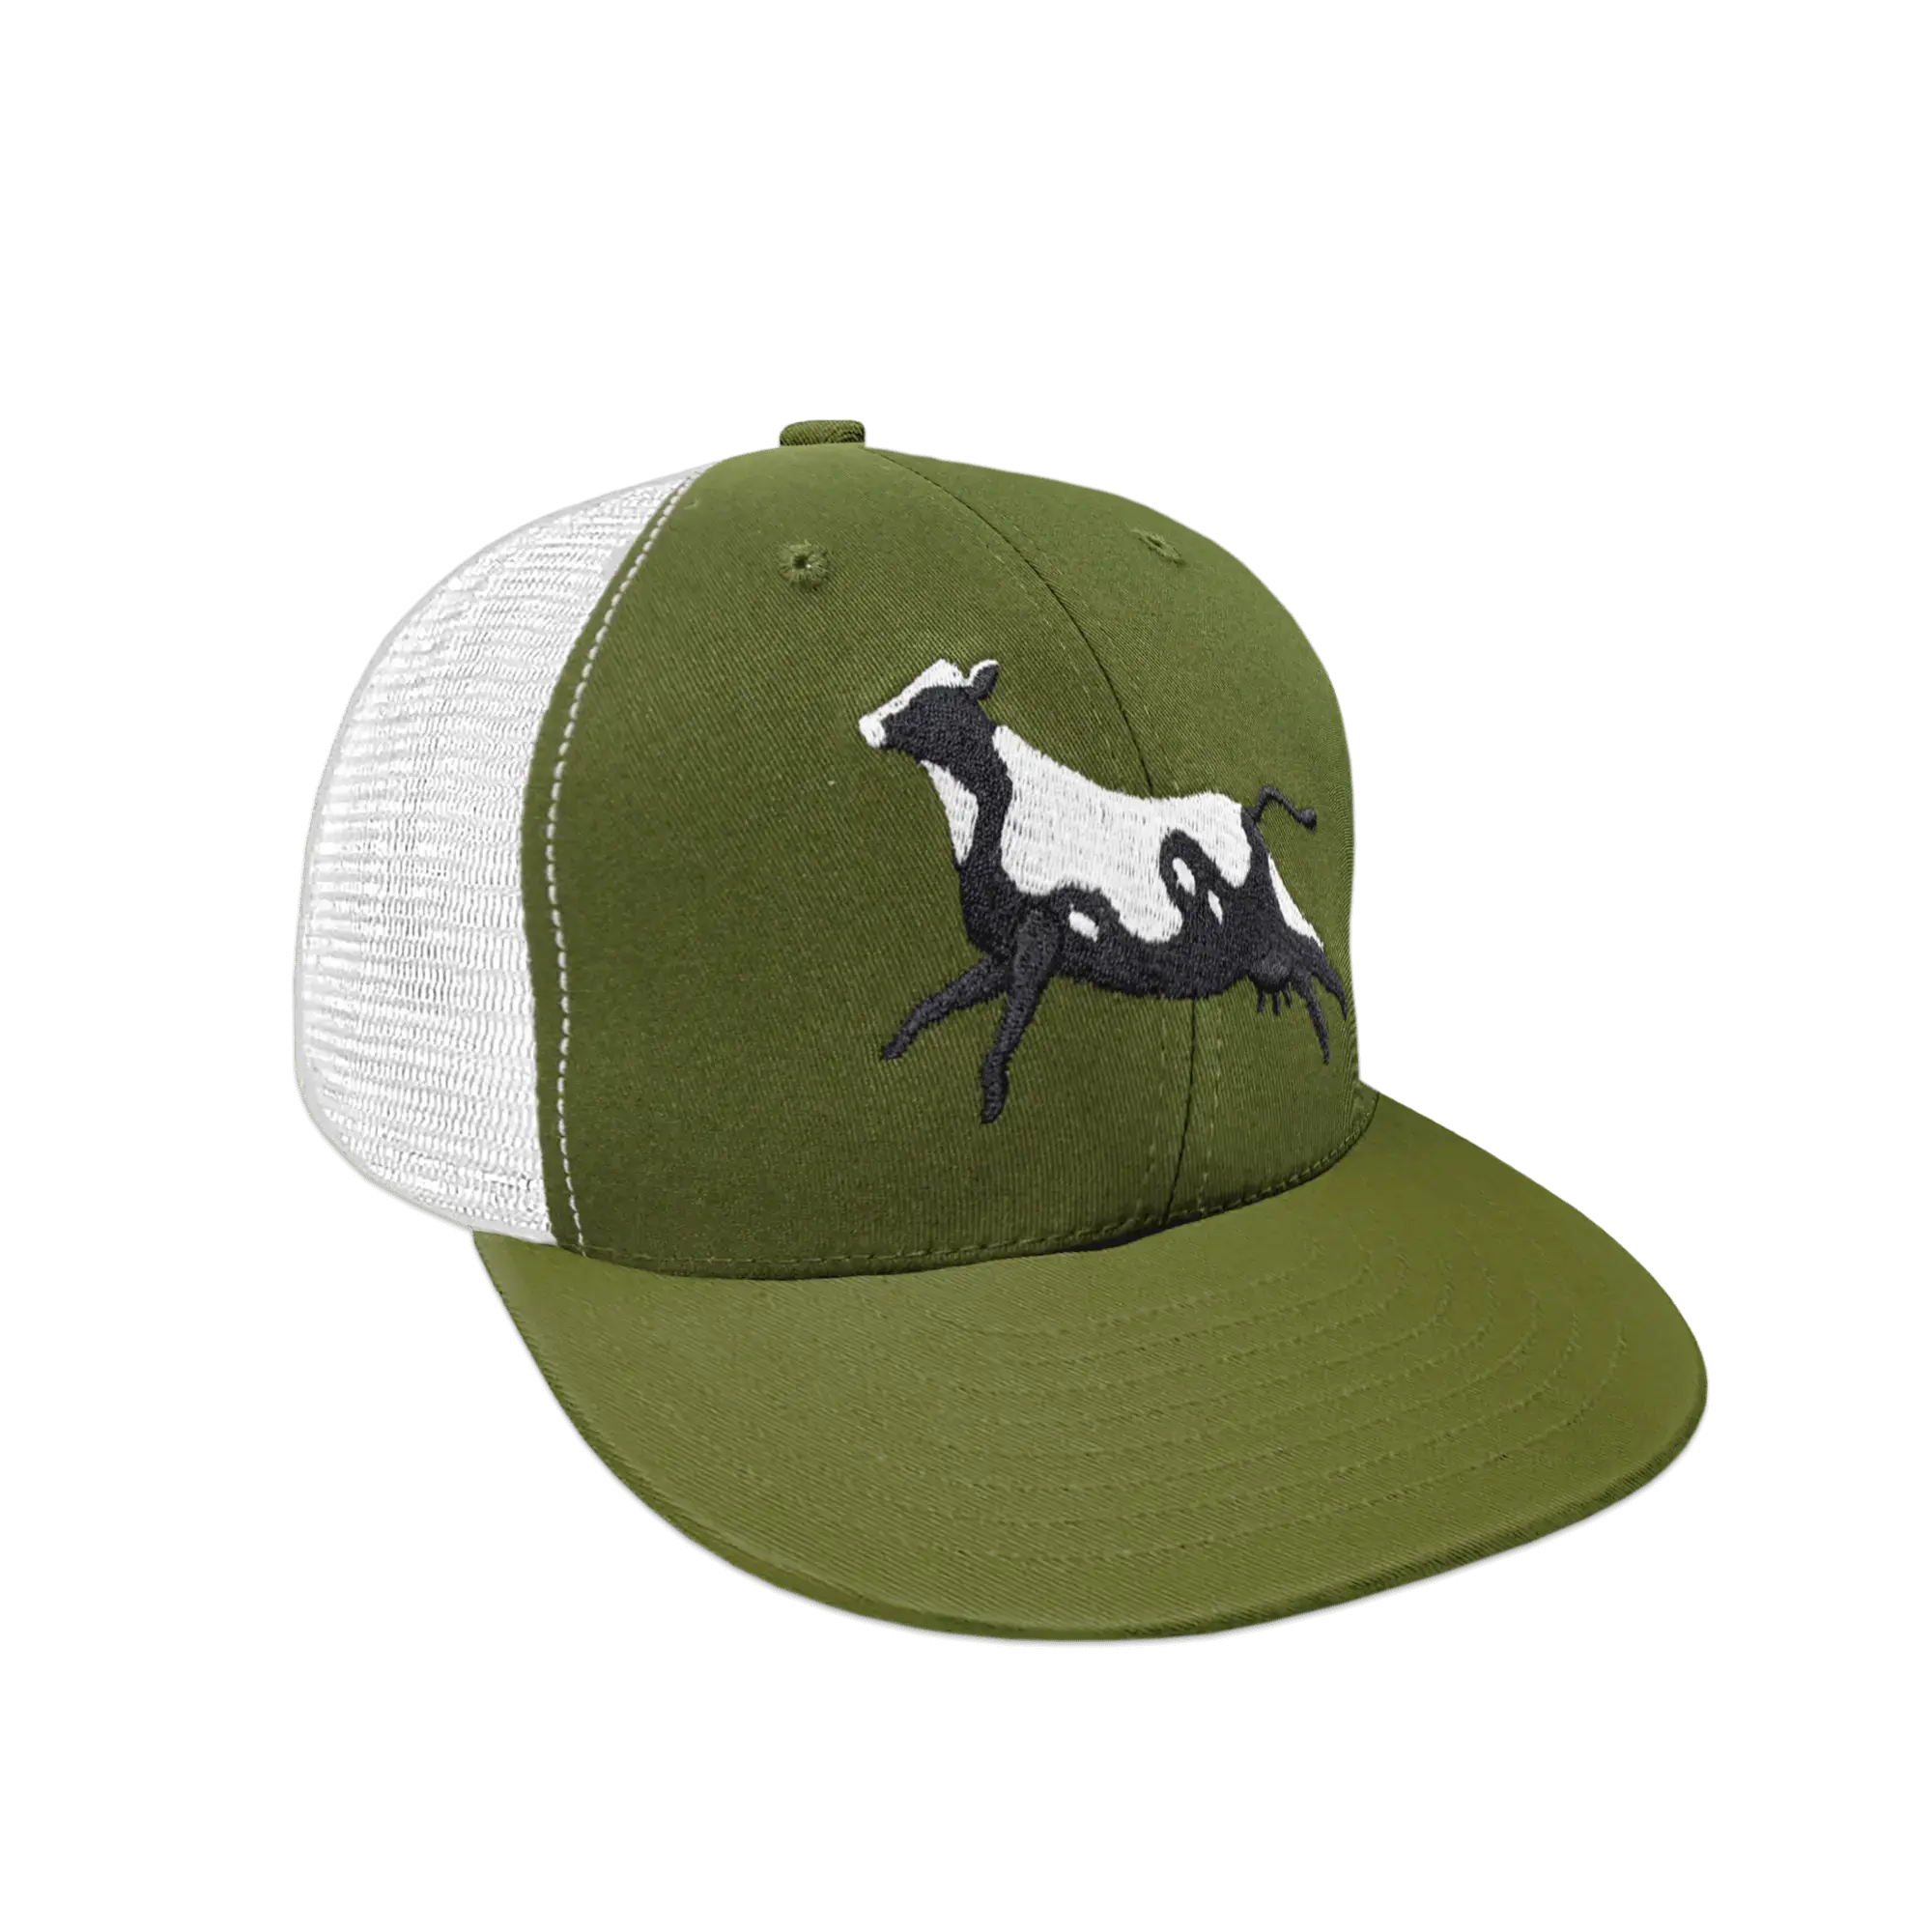 Visit the Leaping Cow Hat Product Page